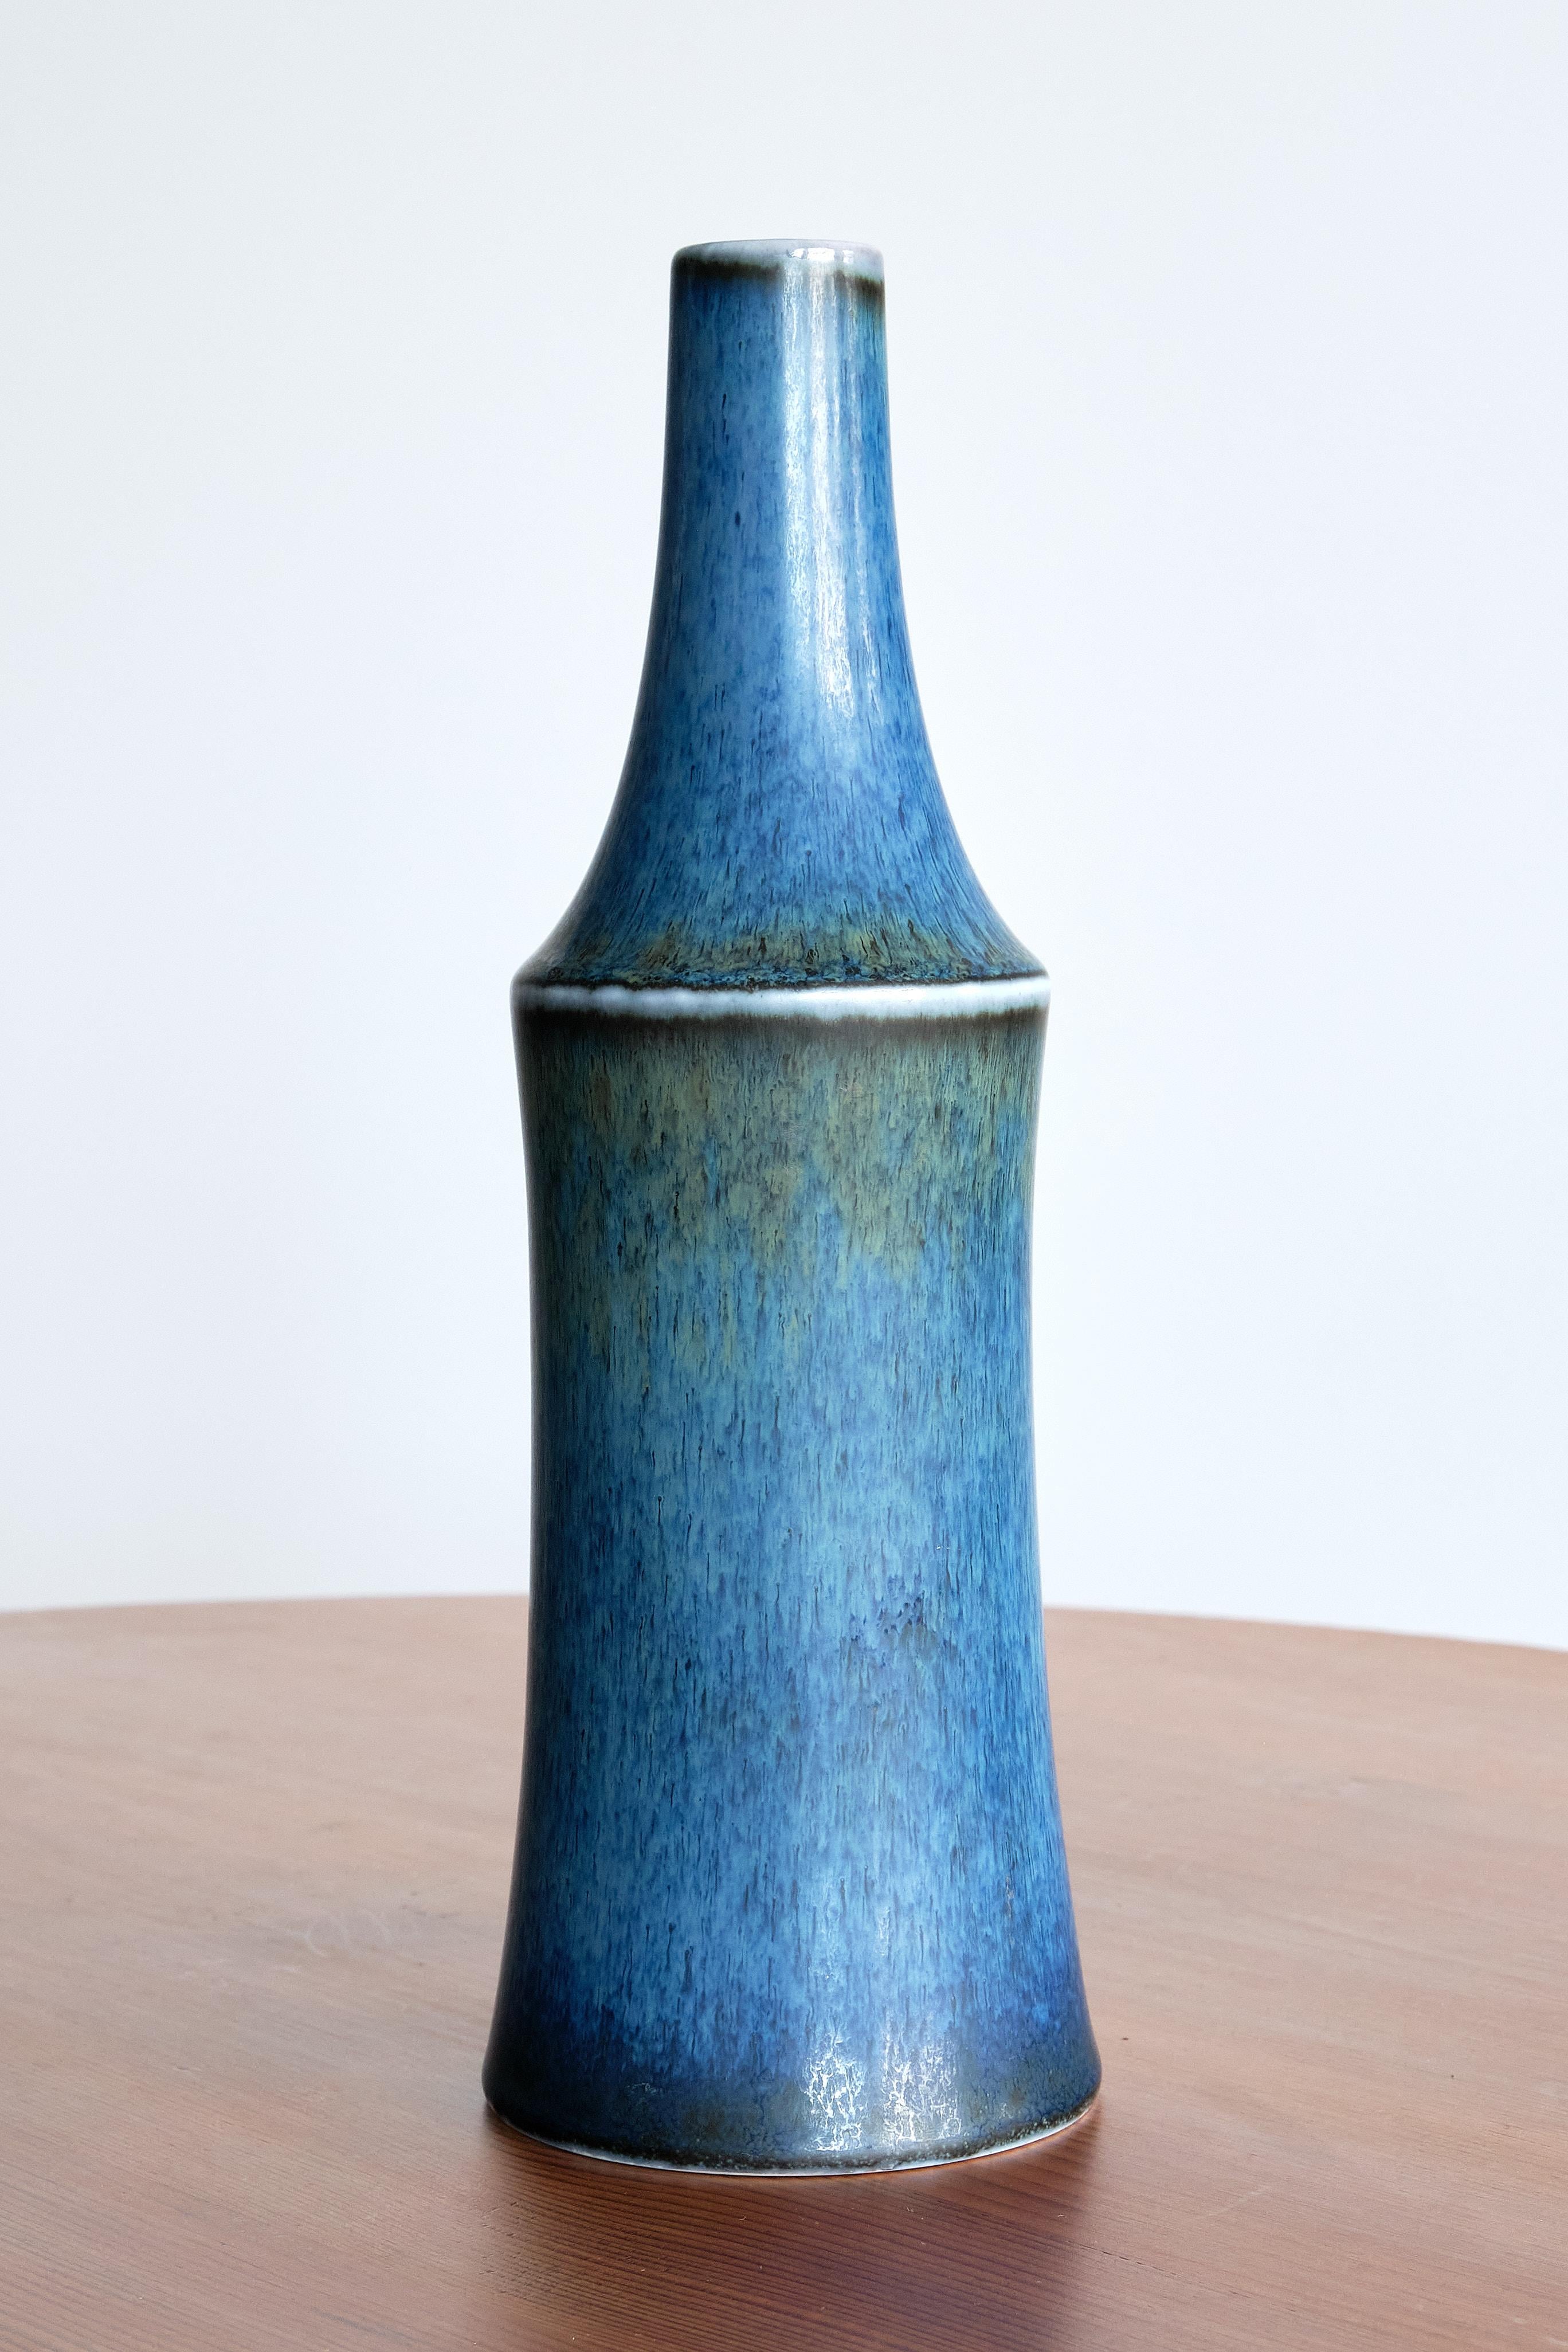 This rare stoneware vase was designed by Carl-Harry Stålhane and produced by Rörstrand in Sweden. The unique vase is finished in a blue harfur glaze which was entirely applied by hand. The hand finish allows for a beautiful transition of the colors